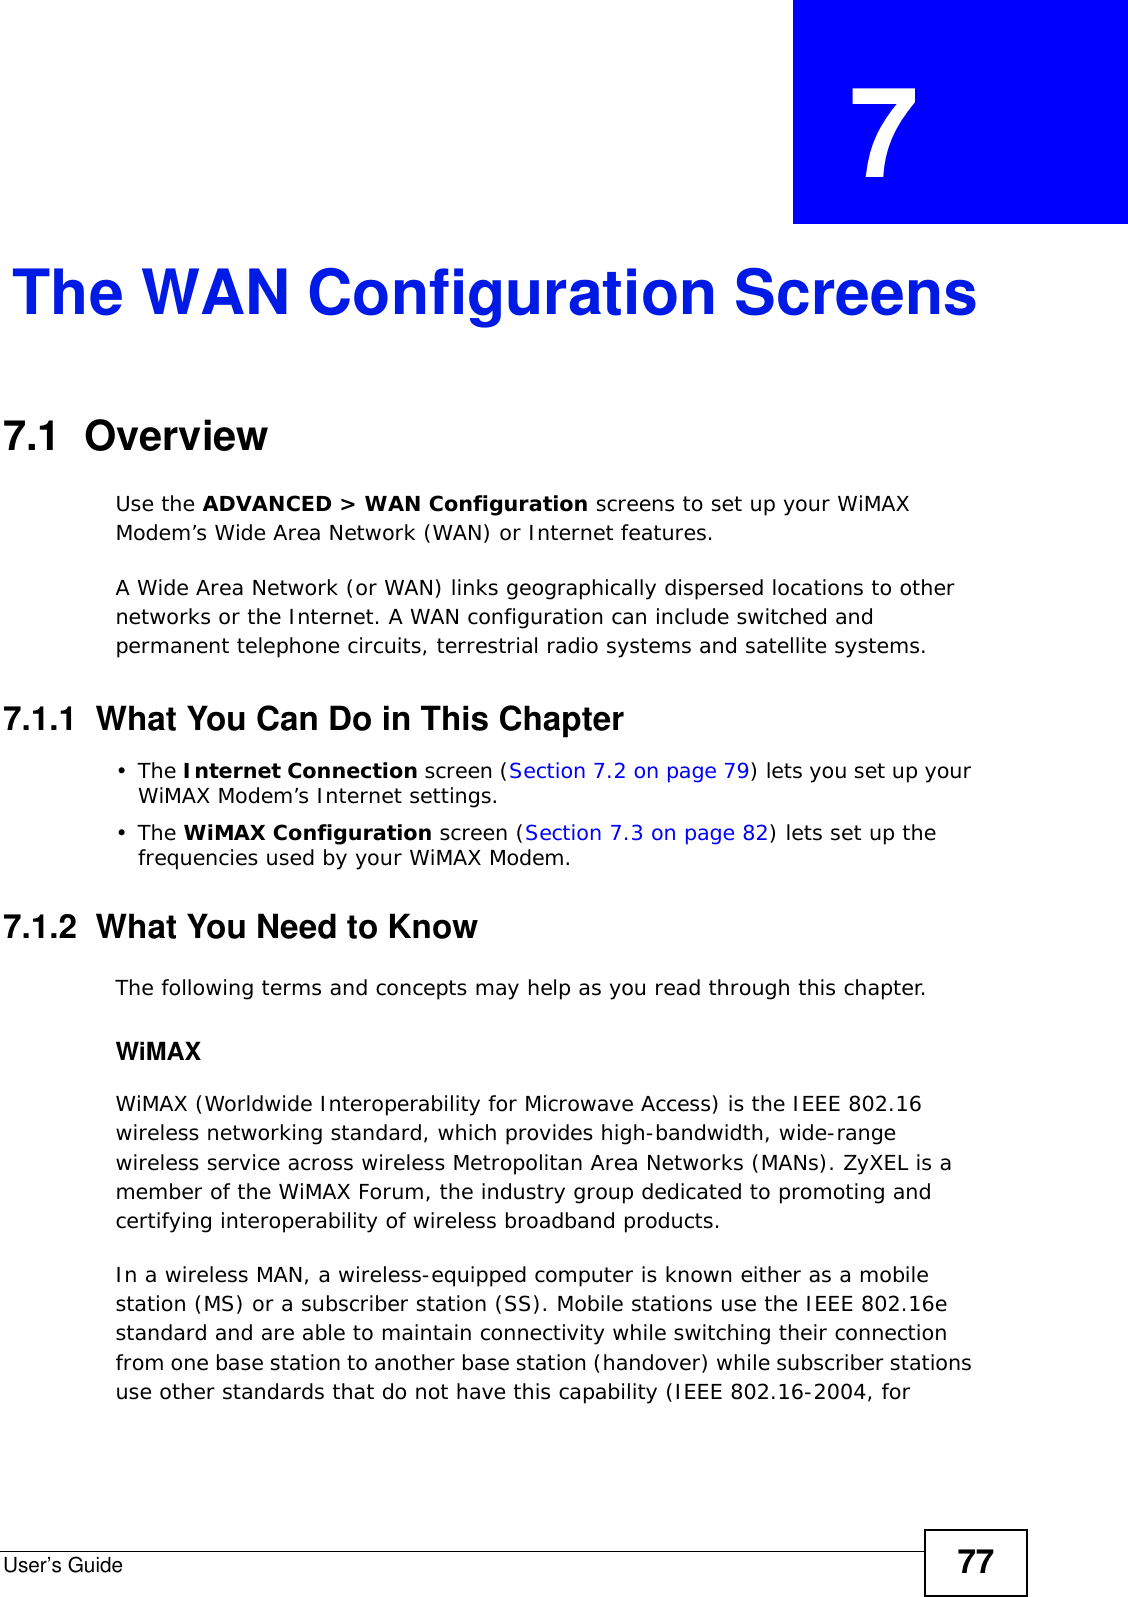 User’s Guide 77CHAPTER  7 The WAN Configuration Screens7.1  Overview Use the ADVANCED &gt; WAN Configuration screens to set up your WiMAX Modem’s Wide Area Network (WAN) or Internet features.A Wide Area Network (or WAN) links geographically dispersed locations to other networks or the Internet. A WAN configuration can include switched and permanent telephone circuits, terrestrial radio systems and satellite systems.7.1.1  What You Can Do in This Chapter•The Internet Connection screen (Section 7.2 on page 79) lets you set up your WiMAX Modem’s Internet settings.•The WiMAX Configuration screen (Section 7.3 on page 82) lets set up the frequencies used by your WiMAX Modem.7.1.2  What You Need to KnowThe following terms and concepts may help as you read through this chapter.WiMAX WiMAX (Worldwide Interoperability for Microwave Access) is the IEEE 802.16 wireless networking standard, which provides high-bandwidth, wide-range wireless service across wireless Metropolitan Area Networks (MANs). ZyXEL is a member of the WiMAX Forum, the industry group dedicated to promoting and certifying interoperability of wireless broadband products.In a wireless MAN, a wireless-equipped computer is known either as a mobile station (MS) or a subscriber station (SS). Mobile stations use the IEEE 802.16e standard and are able to maintain connectivity while switching their connection from one base station to another base station (handover) while subscriber stations use other standards that do not have this capability (IEEE 802.16-2004, for 